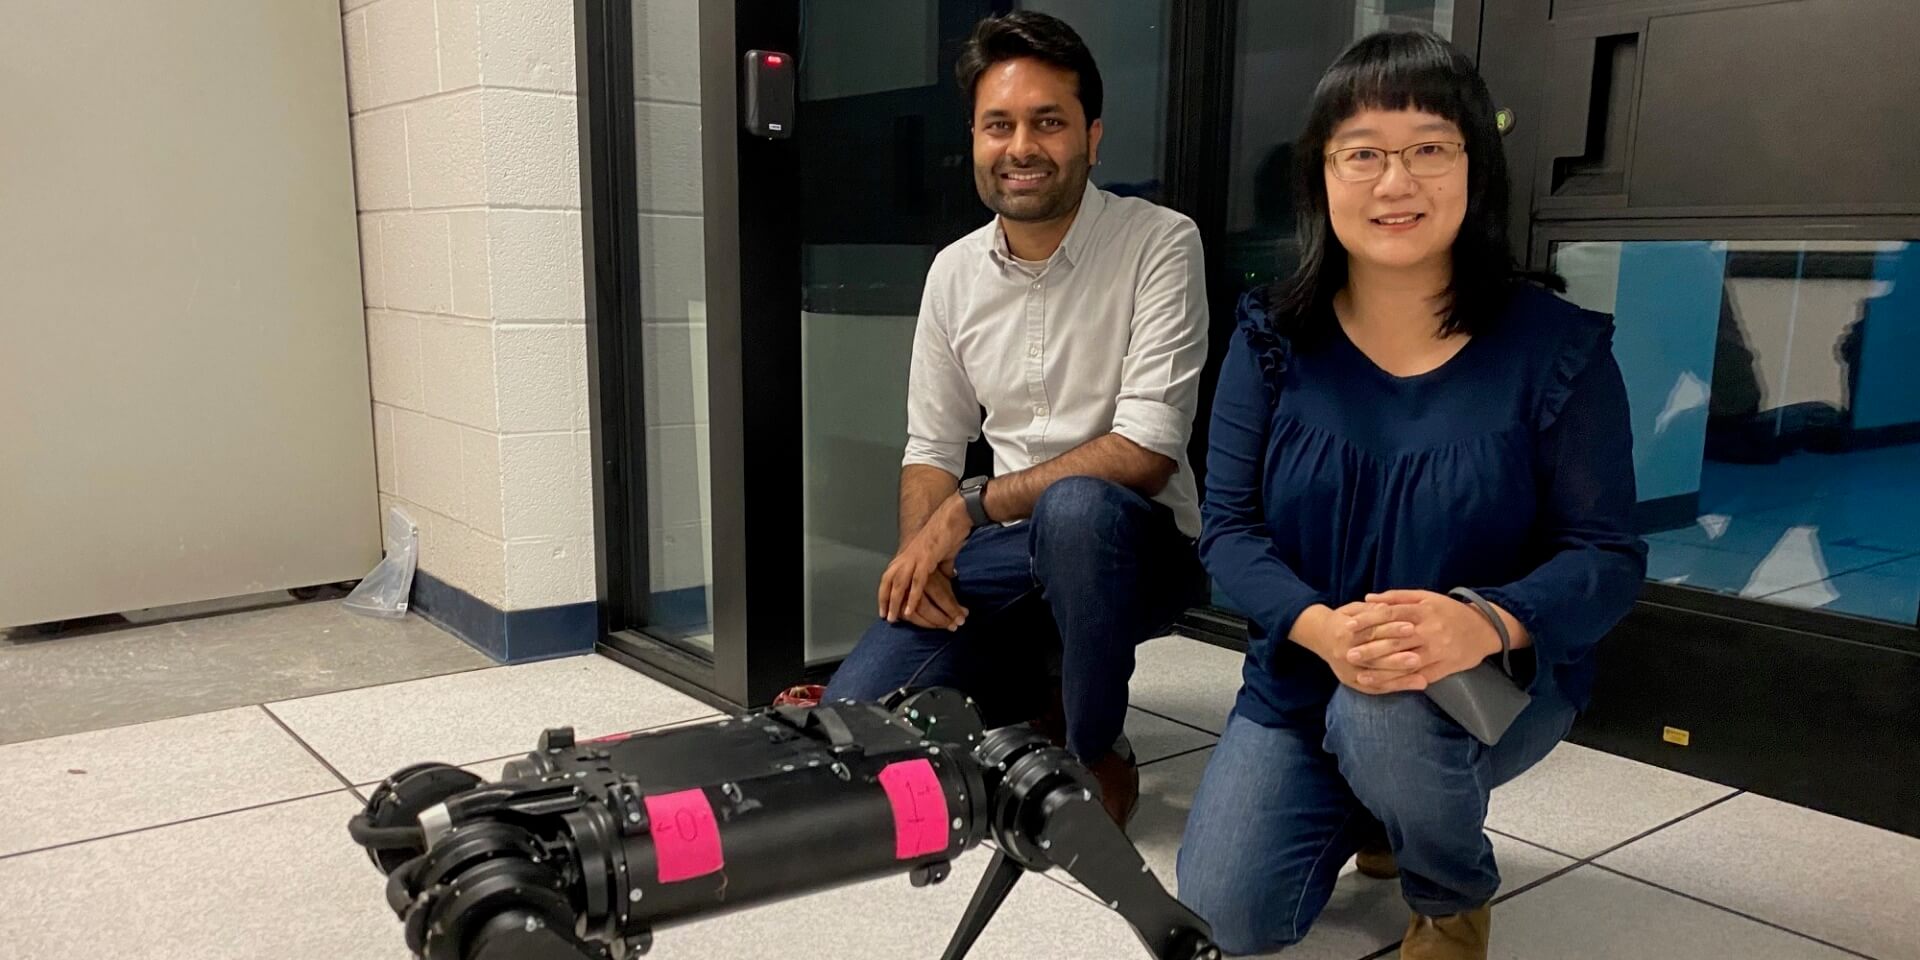 Qian, Bansal study the way robots move, interact with the world around them